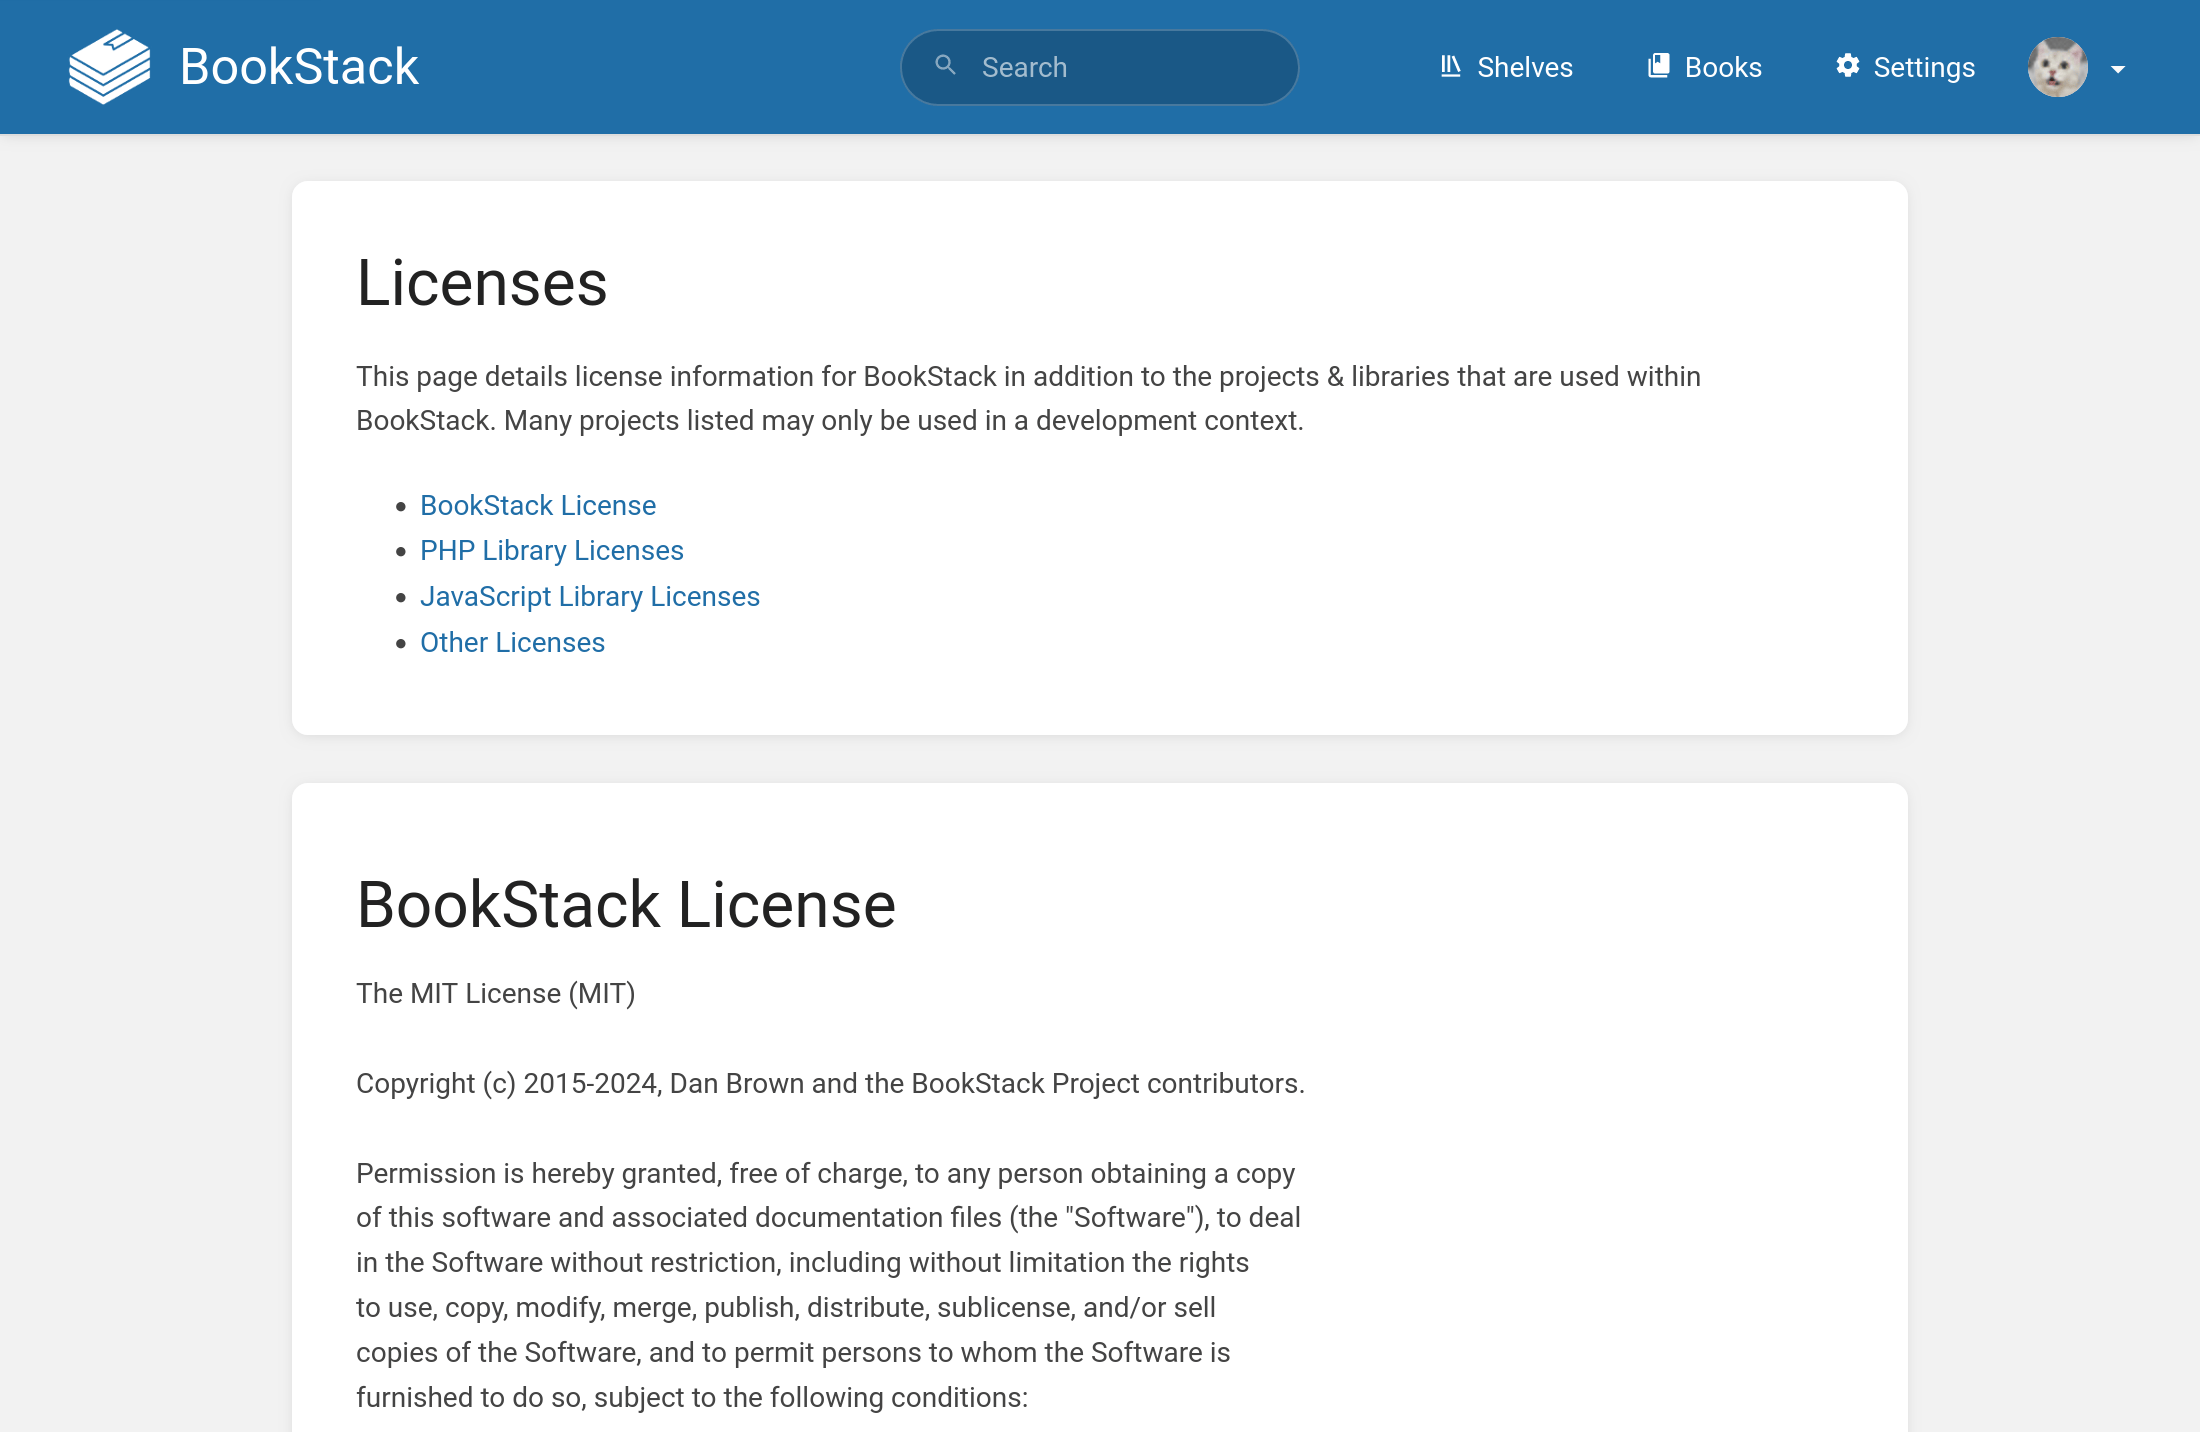 Screenshot of a new BookStack license page. The text on the page details the license information for BookStack, as well as the projects and libraries that are used within BookStack.